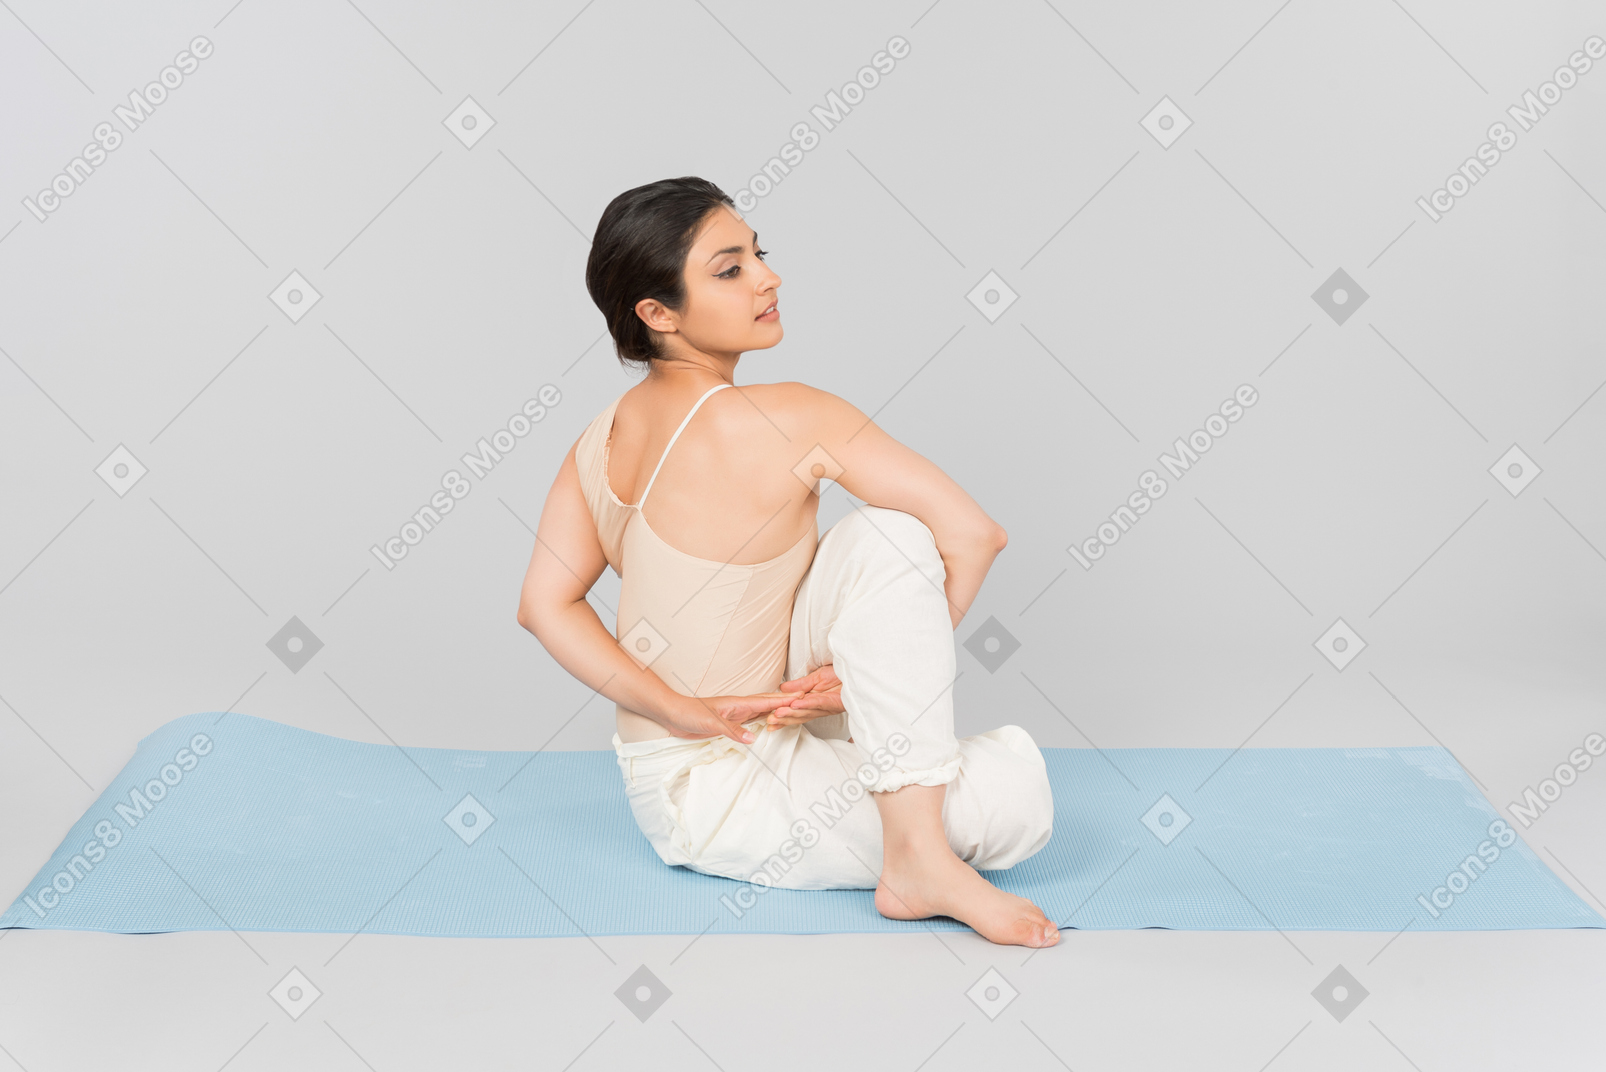 Young indian woman sitting on yoga mat